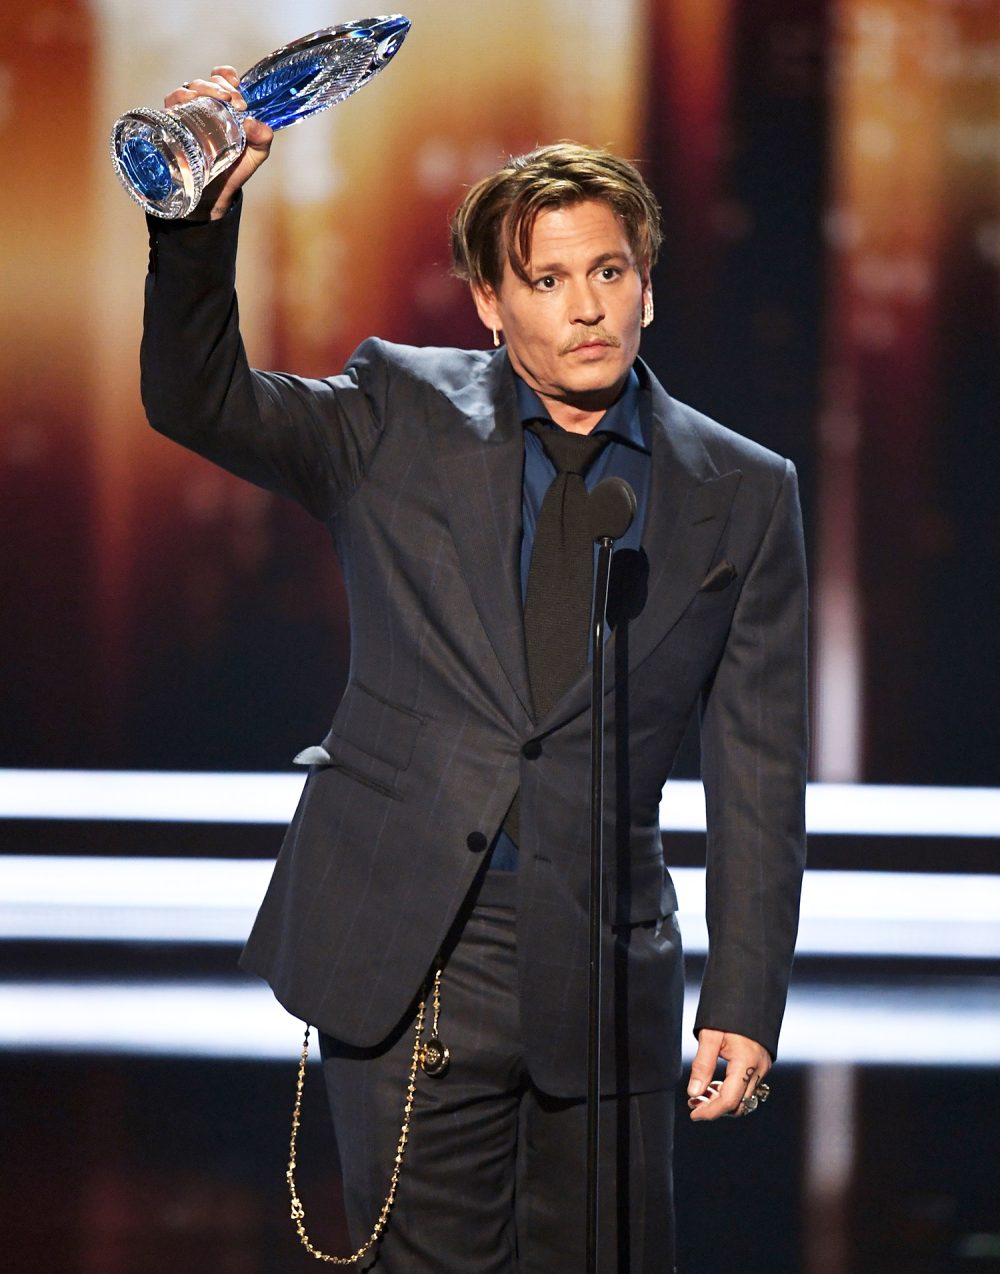 ohnny Depp accepts Favorite Movie Icon onstage during the People's Choice Awards 2017 at Microsoft Theater on January 18, 2017 in Los Angeles, California.